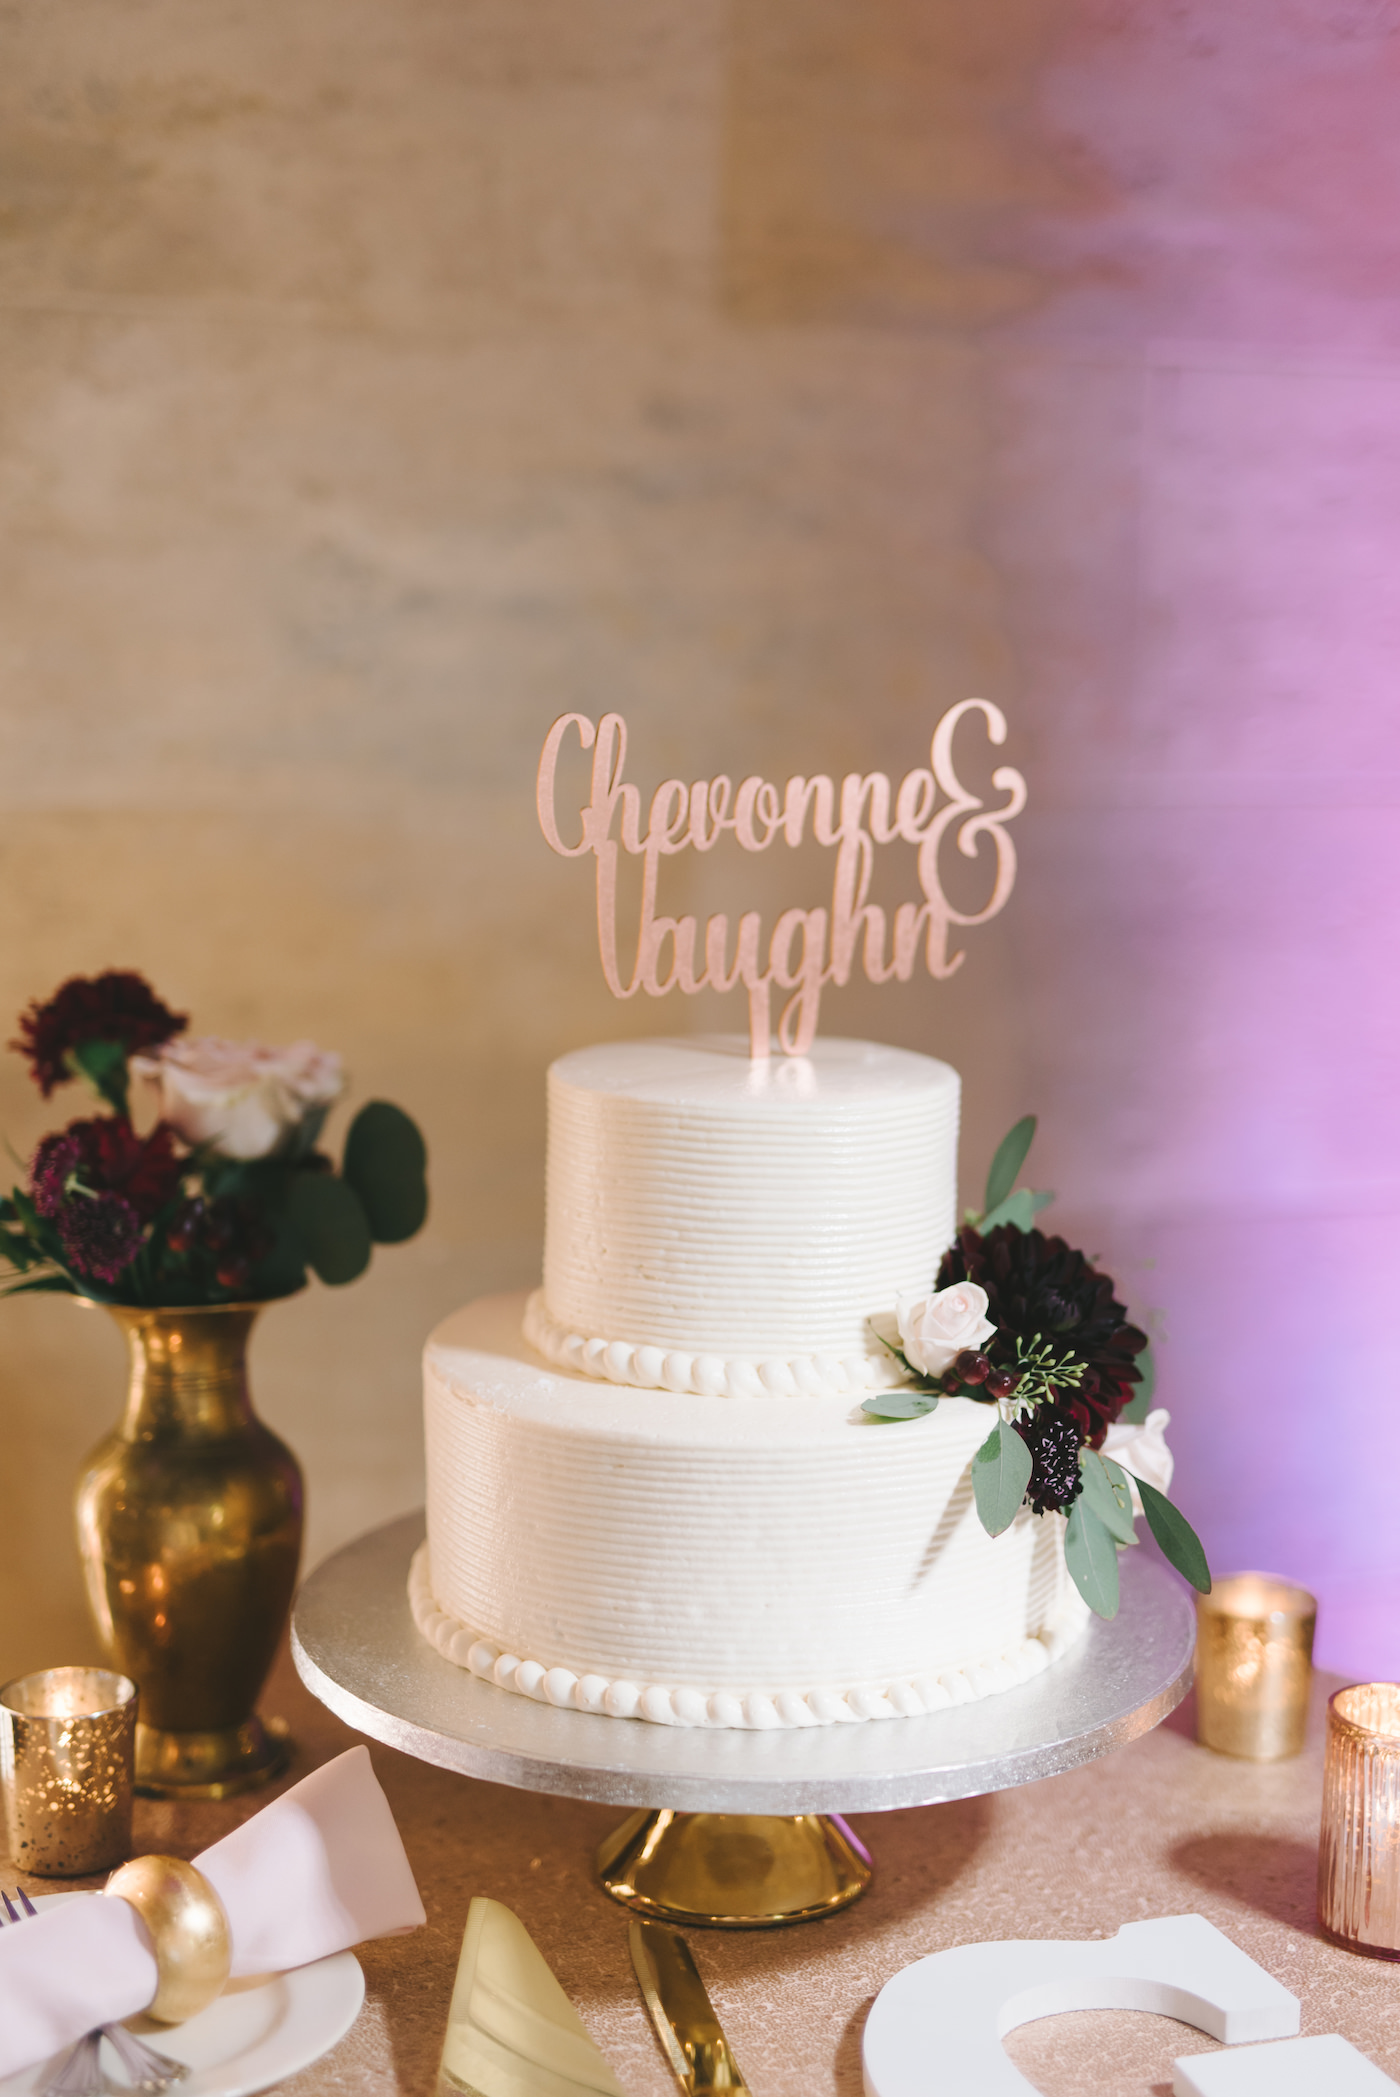 Romantic Wedding Cake and Table, Two Tier White Round Cake with Customized Gold Topper, Decorated with Burgundy Dark Red Floral, Blush Pink Roses, Gold Mercury Candles | Florida Wedding Planner Special Moments Event Planning | Sarasota Wedding Photographer Kera Photography